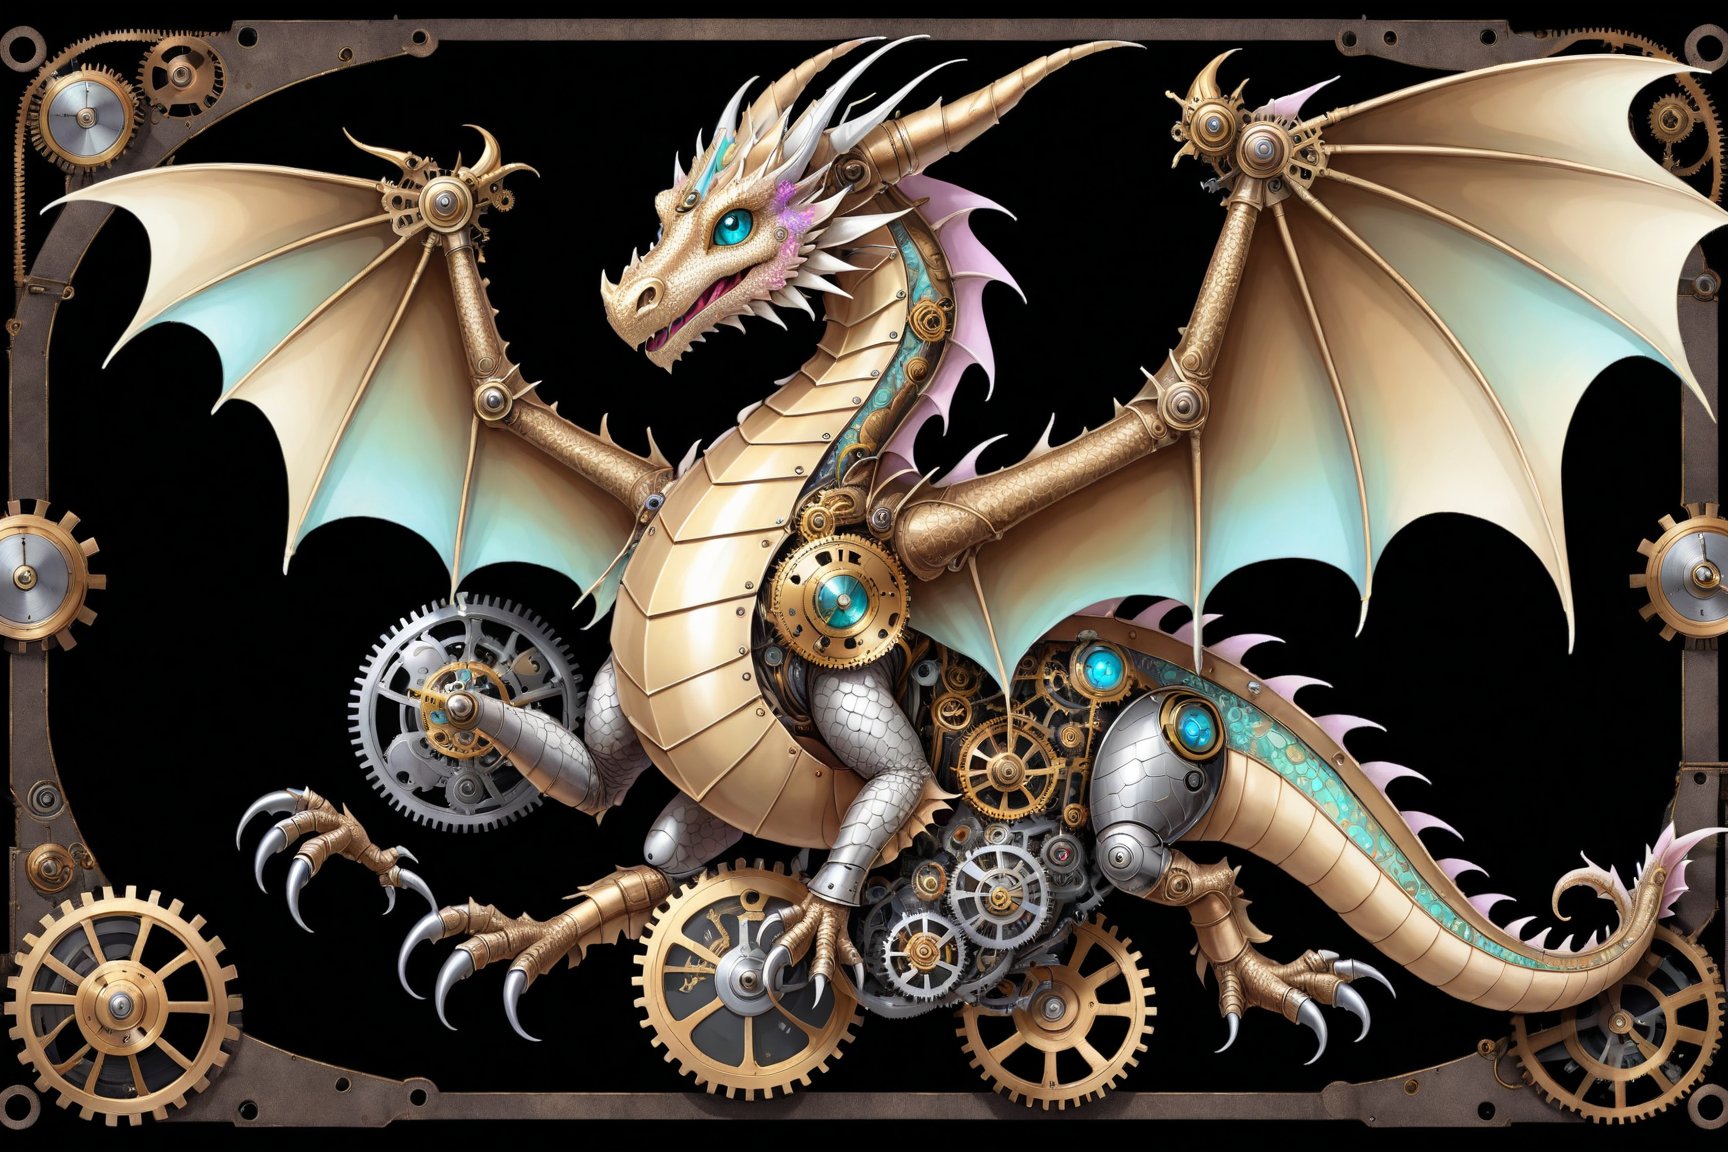 Generates a detailed steampunk style image with pastel colors and golden brown of a dragon with wing seen from above. The beetle must be adorned with intricate gears and mechanical elements that imitate its natural structure. The image must be high resolution and show a perfect fusion between the organic and the mechanical, black background,DonMSt34mPXL,steampunk,steampunk style